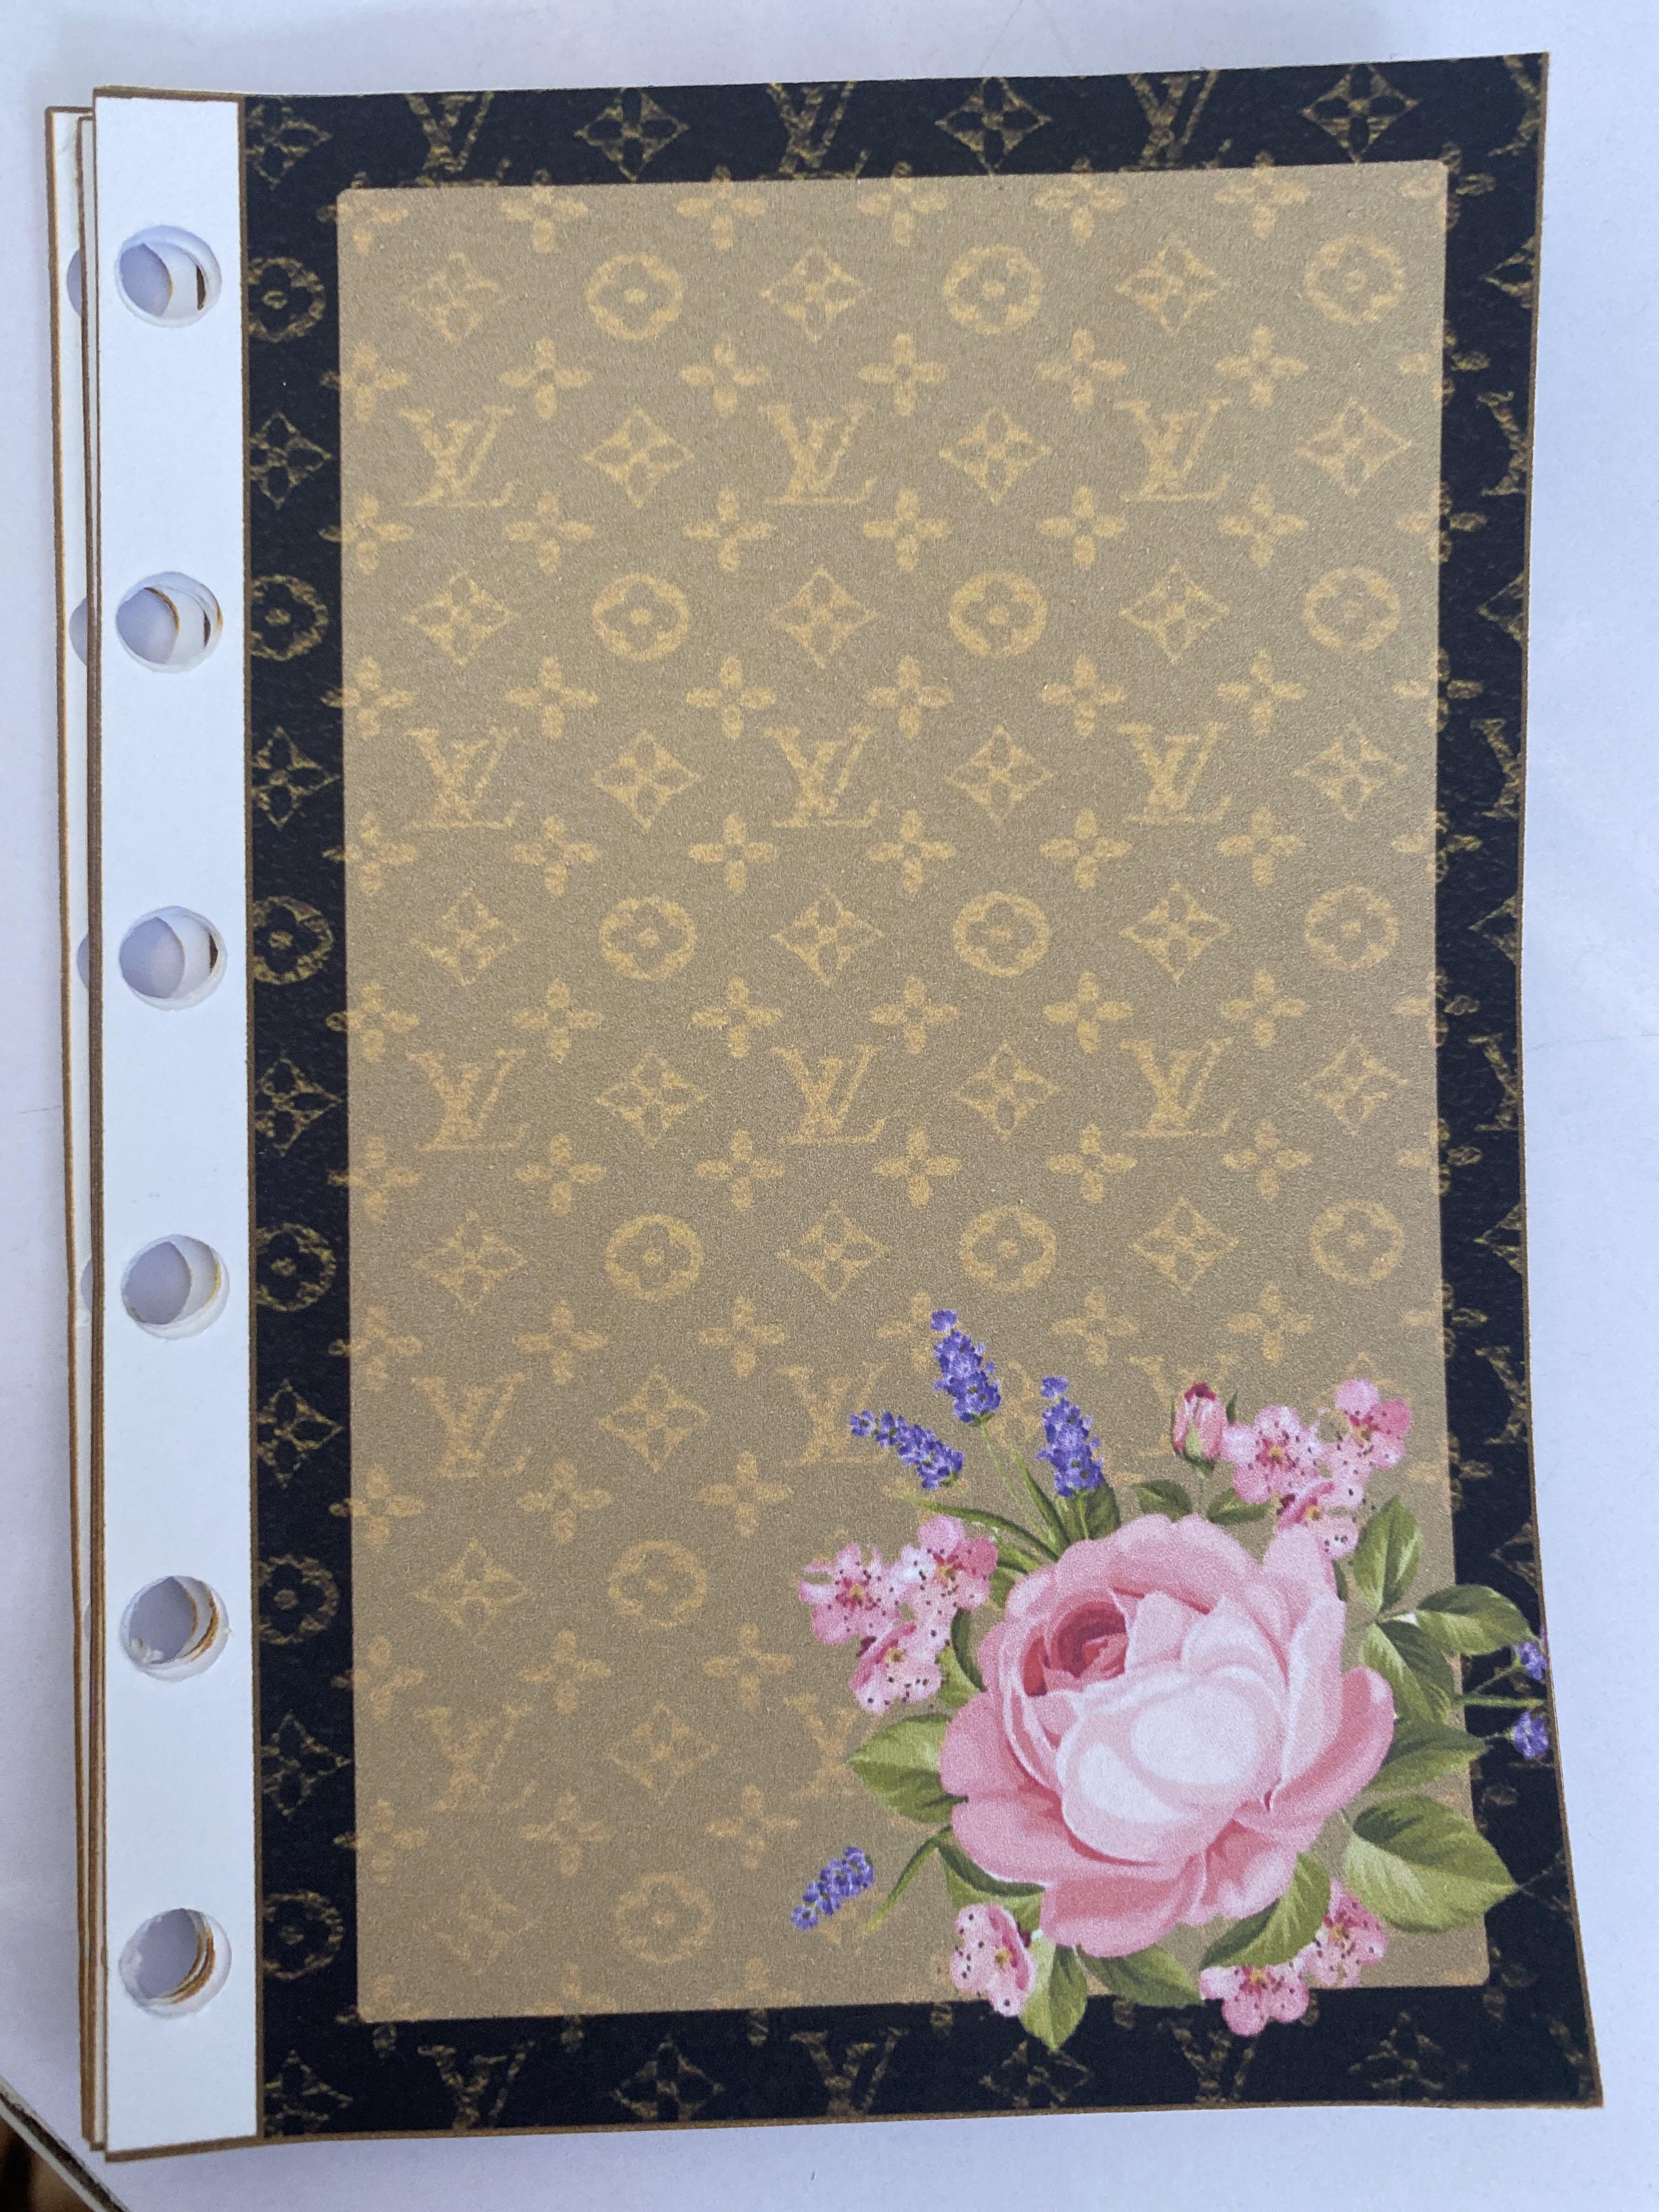 Louis Vuitton LV Agenda Customized Refill for PM size (Refill Only),  Luxury, Accessories on Carousell